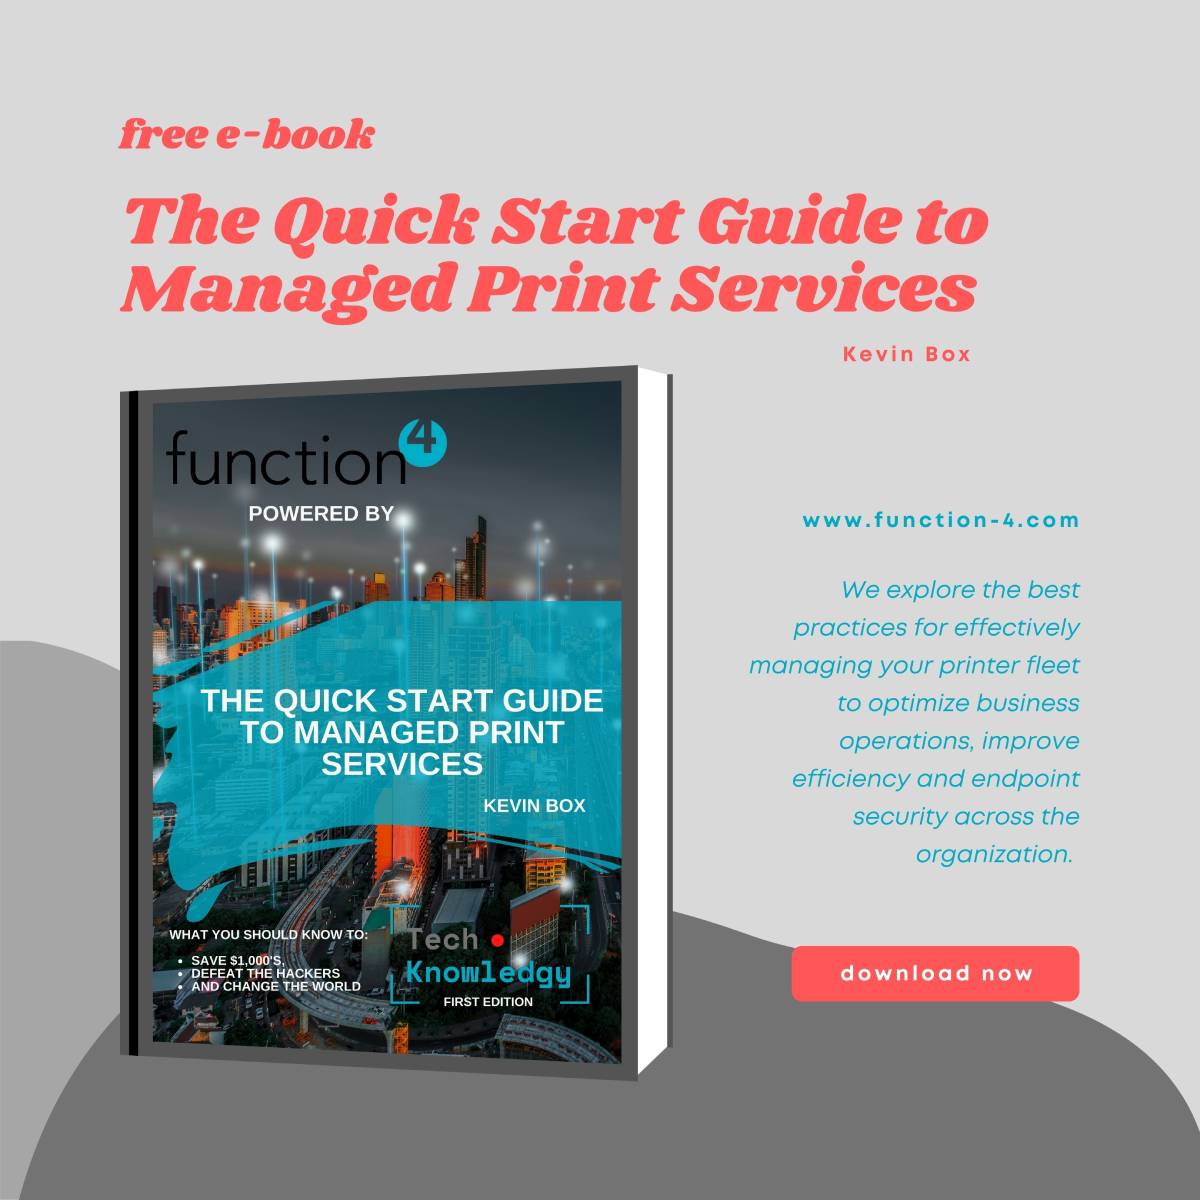 The Quick Start Guide to Managed Print Services